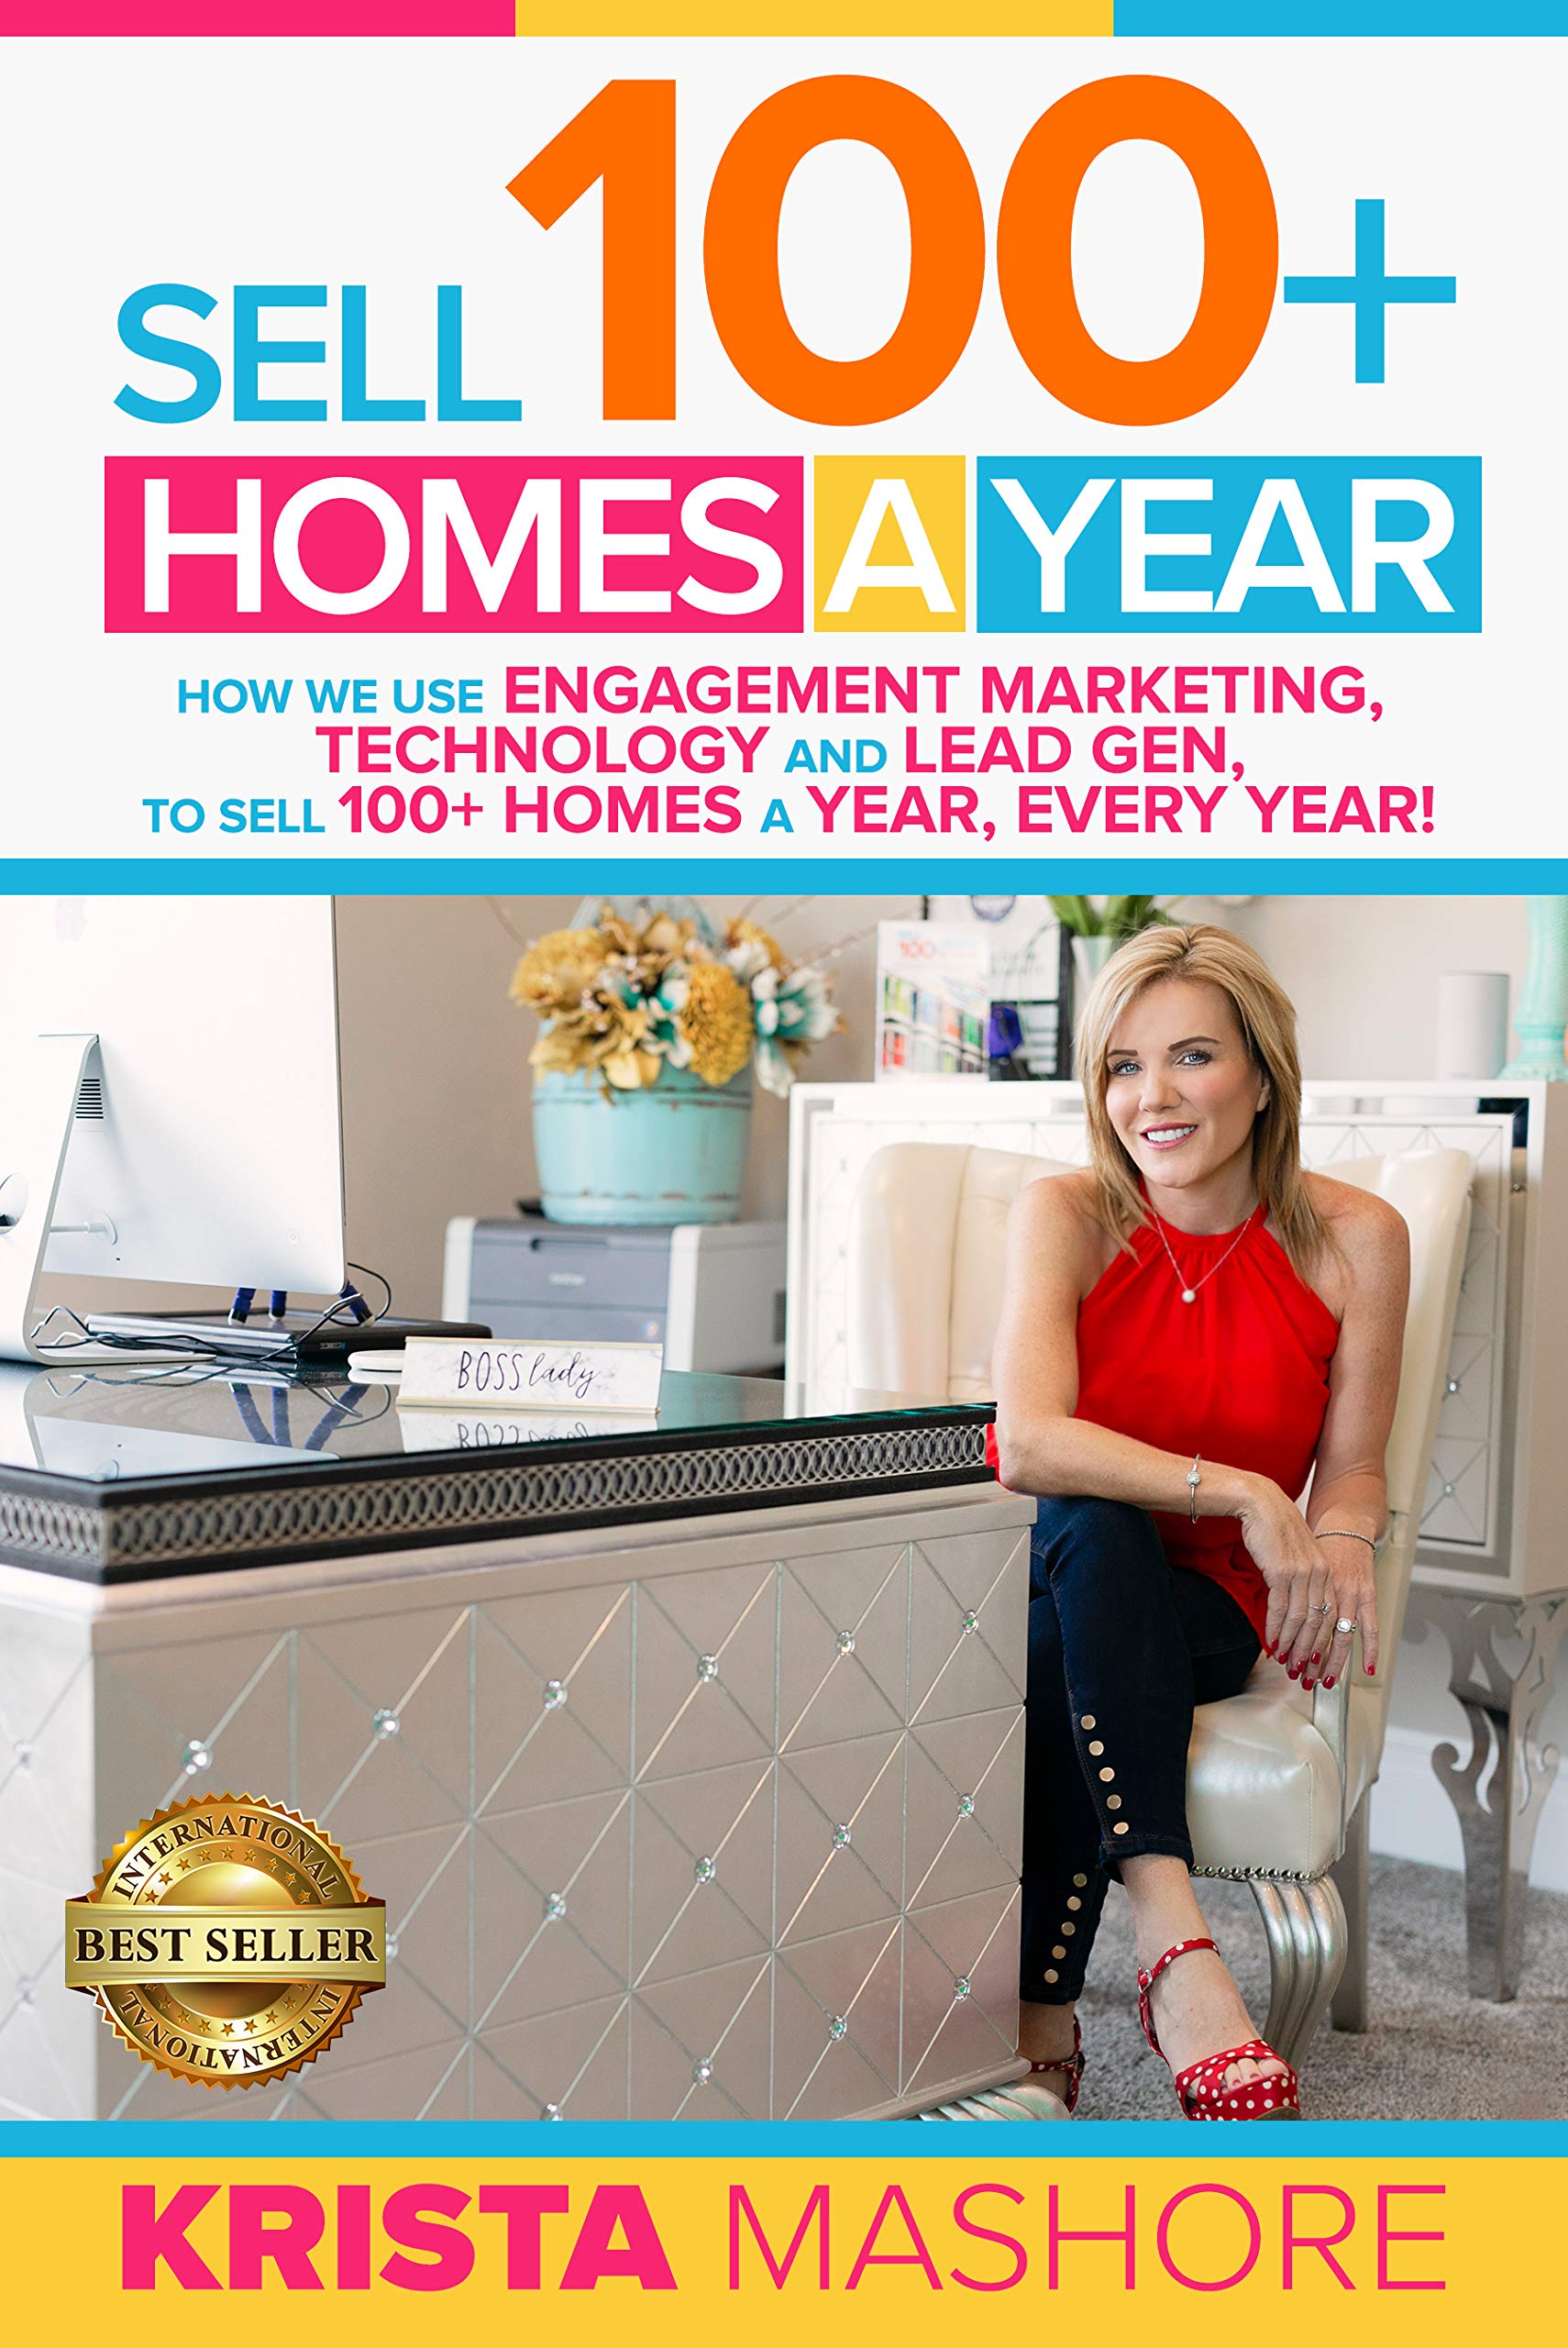 Sell 100+ Homes A Year: How we use Engagement Marketing, Technology and Lead Gen to Sell 100+ Homes A Year, Every Year!